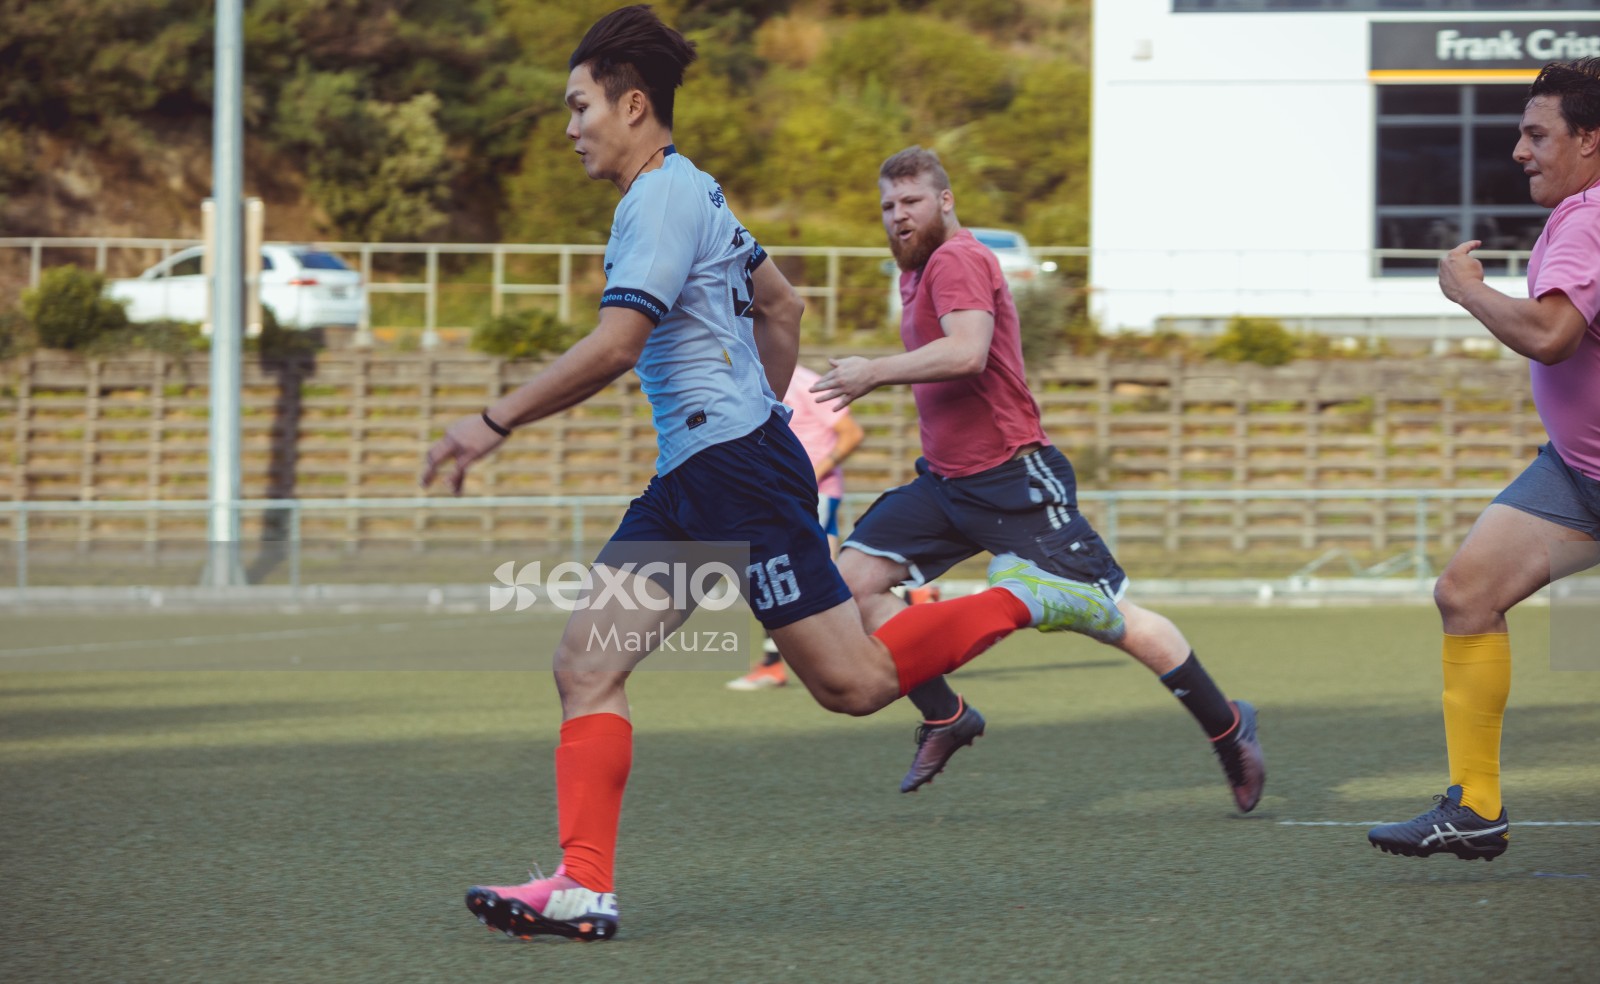 Football player in two different coloured cleats - Sports Zone sunday league